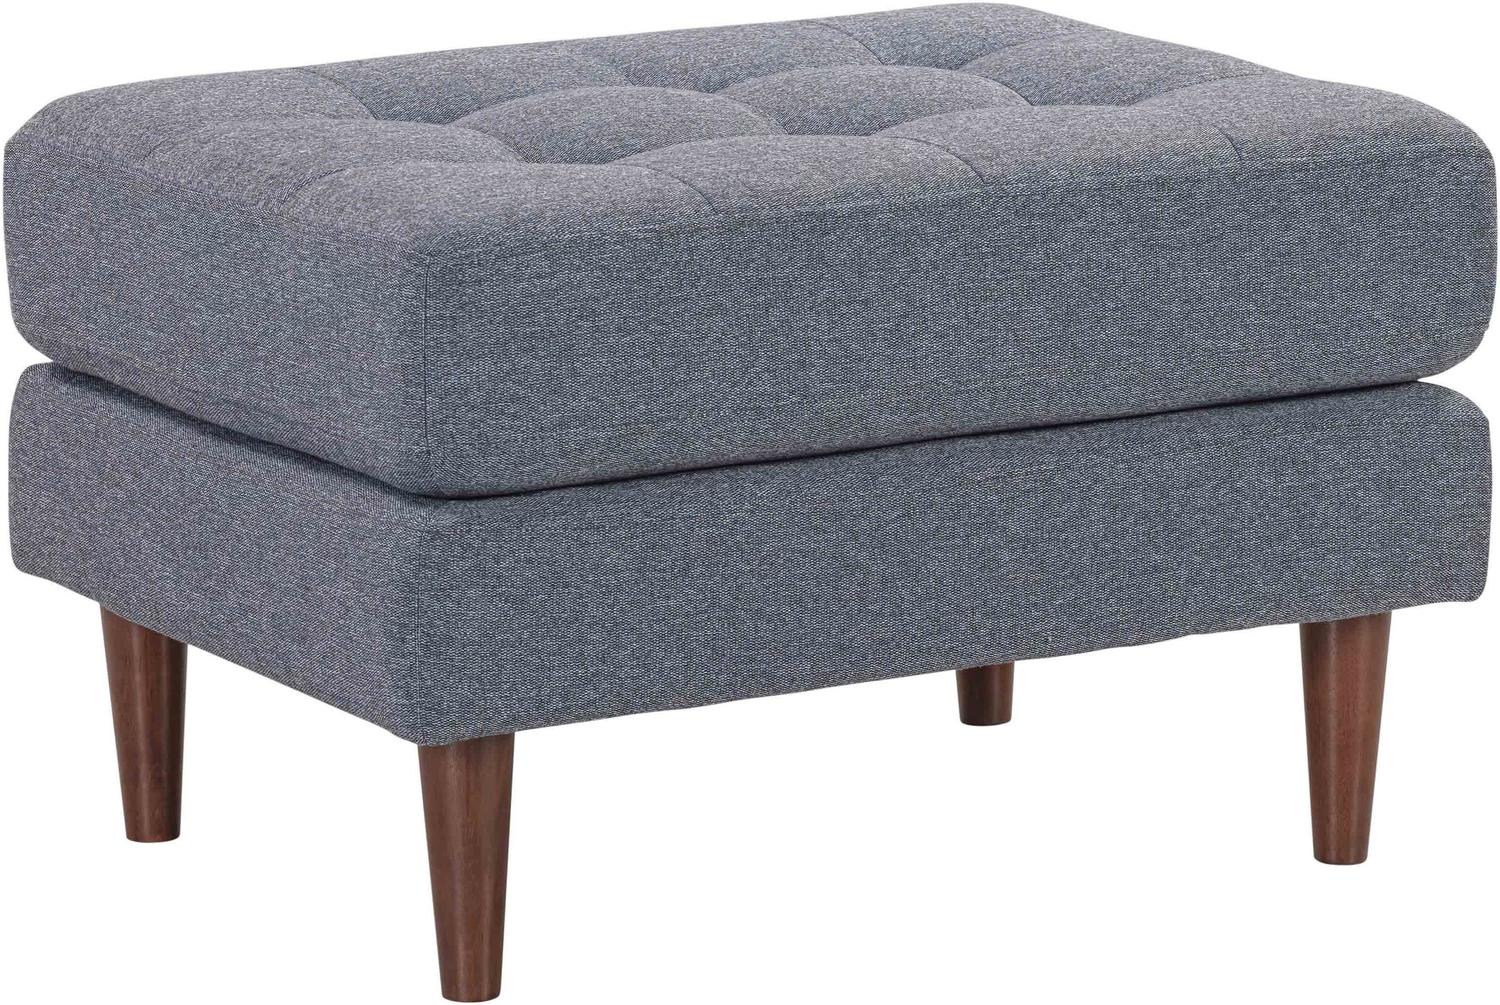 upholstered storage bench grey Contemporary Design Furniture Benches & Ottomans Navy